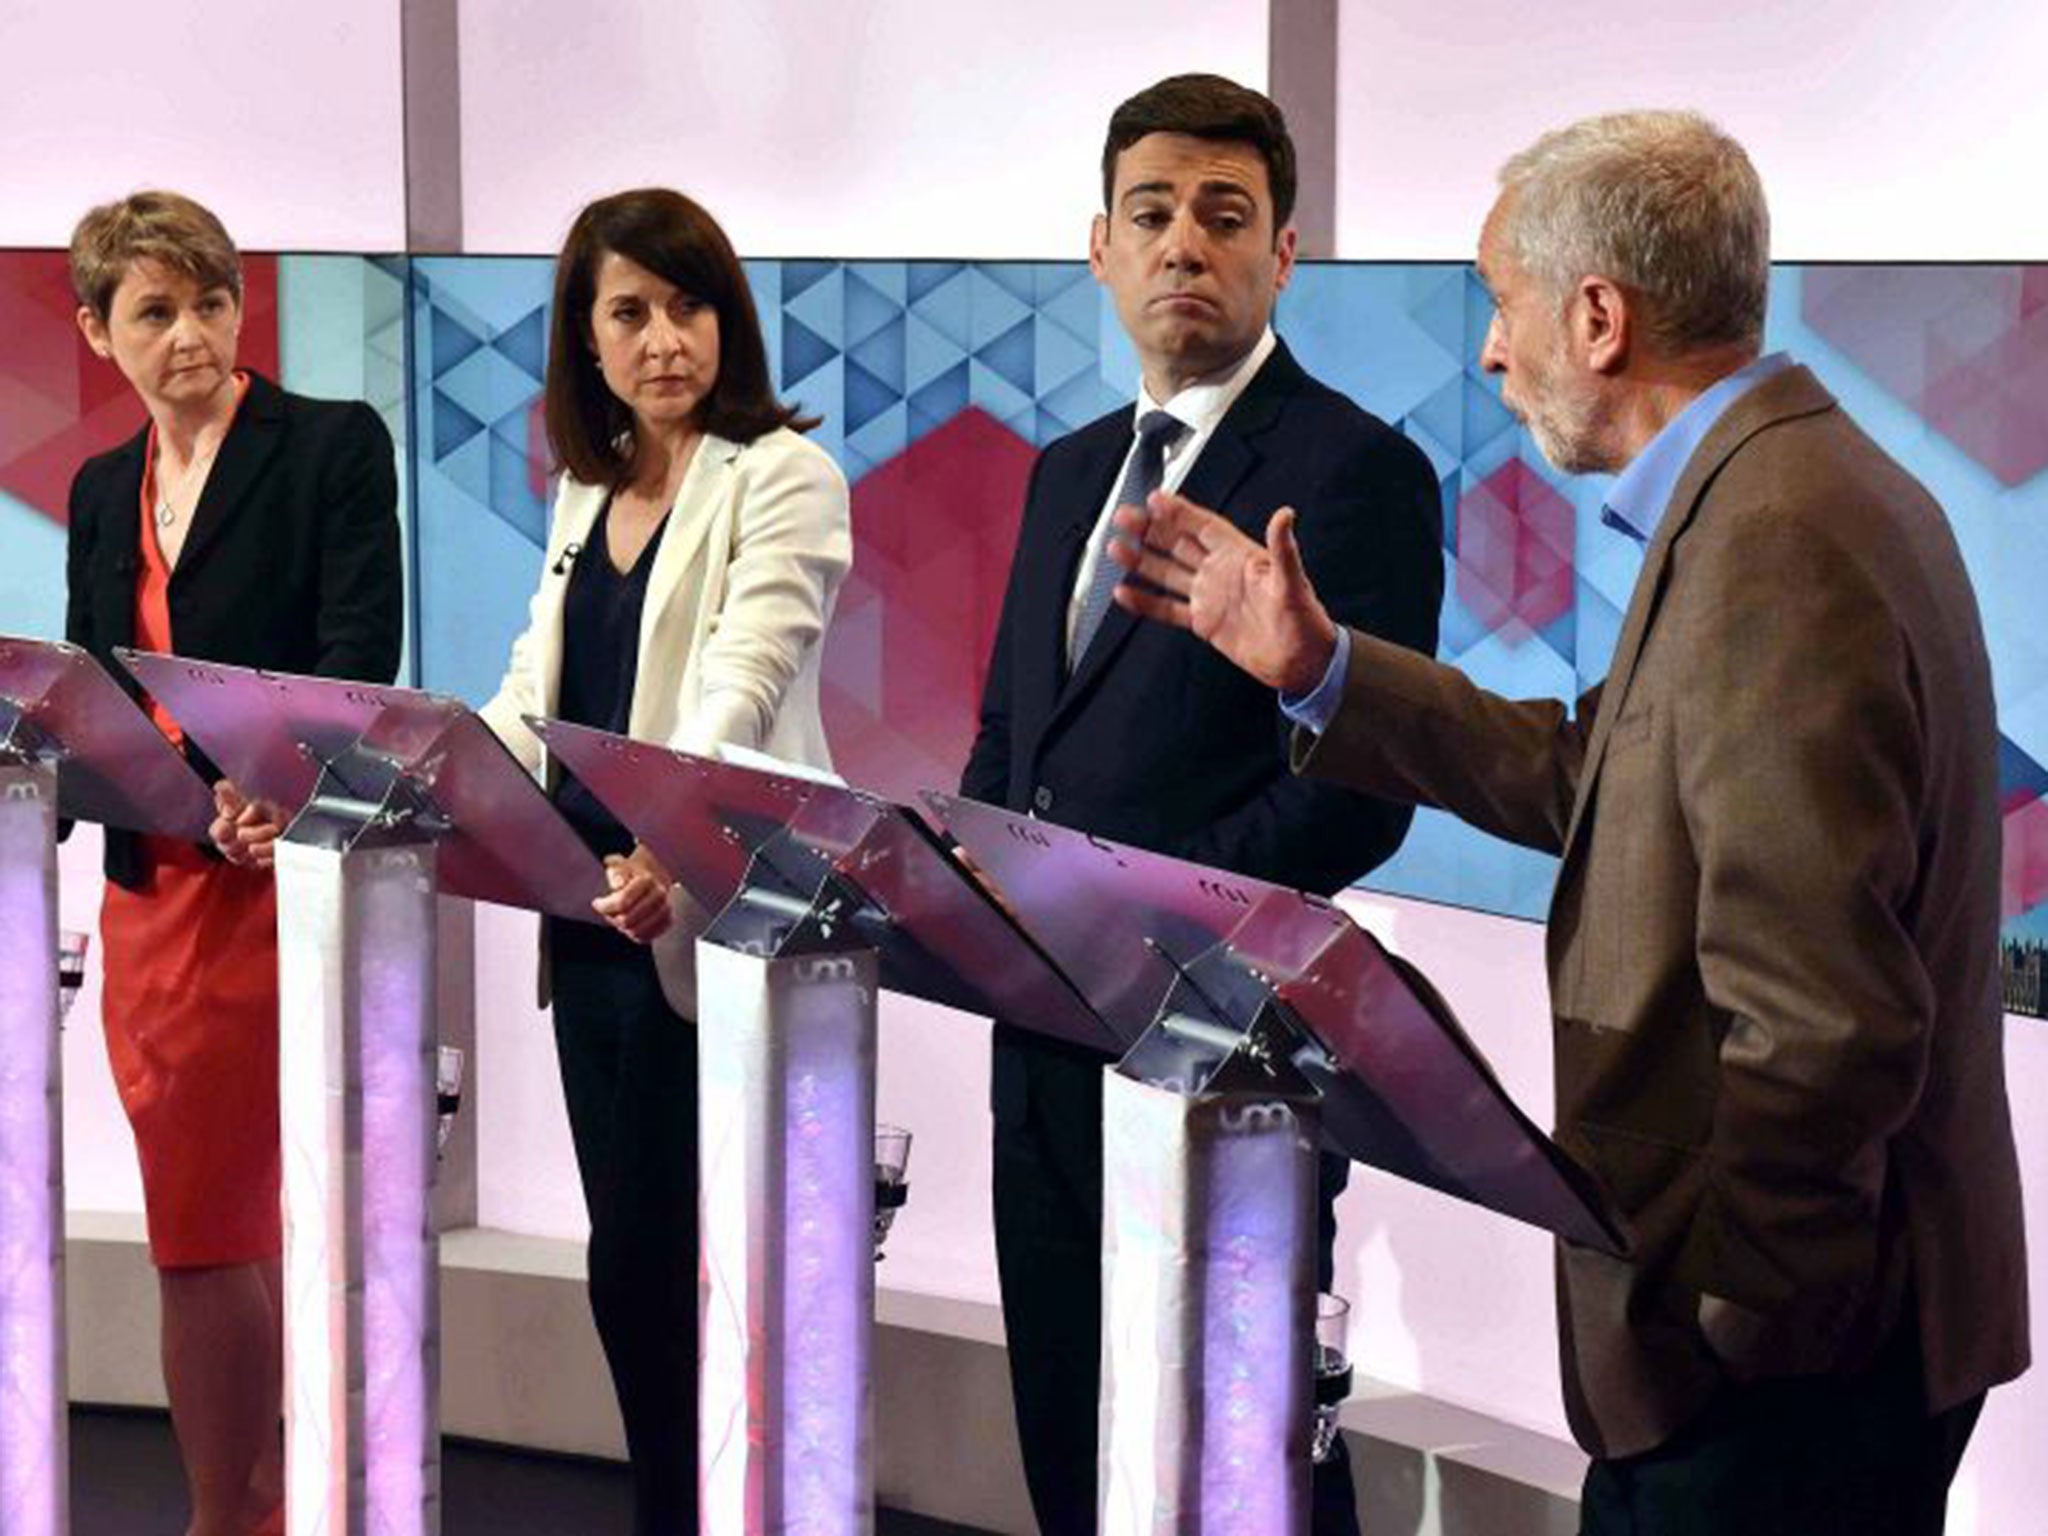 Yvette Cooper, Liz Kendall, Andy Burnham and Jeremy Corbyn in the Labour leadership debate in July